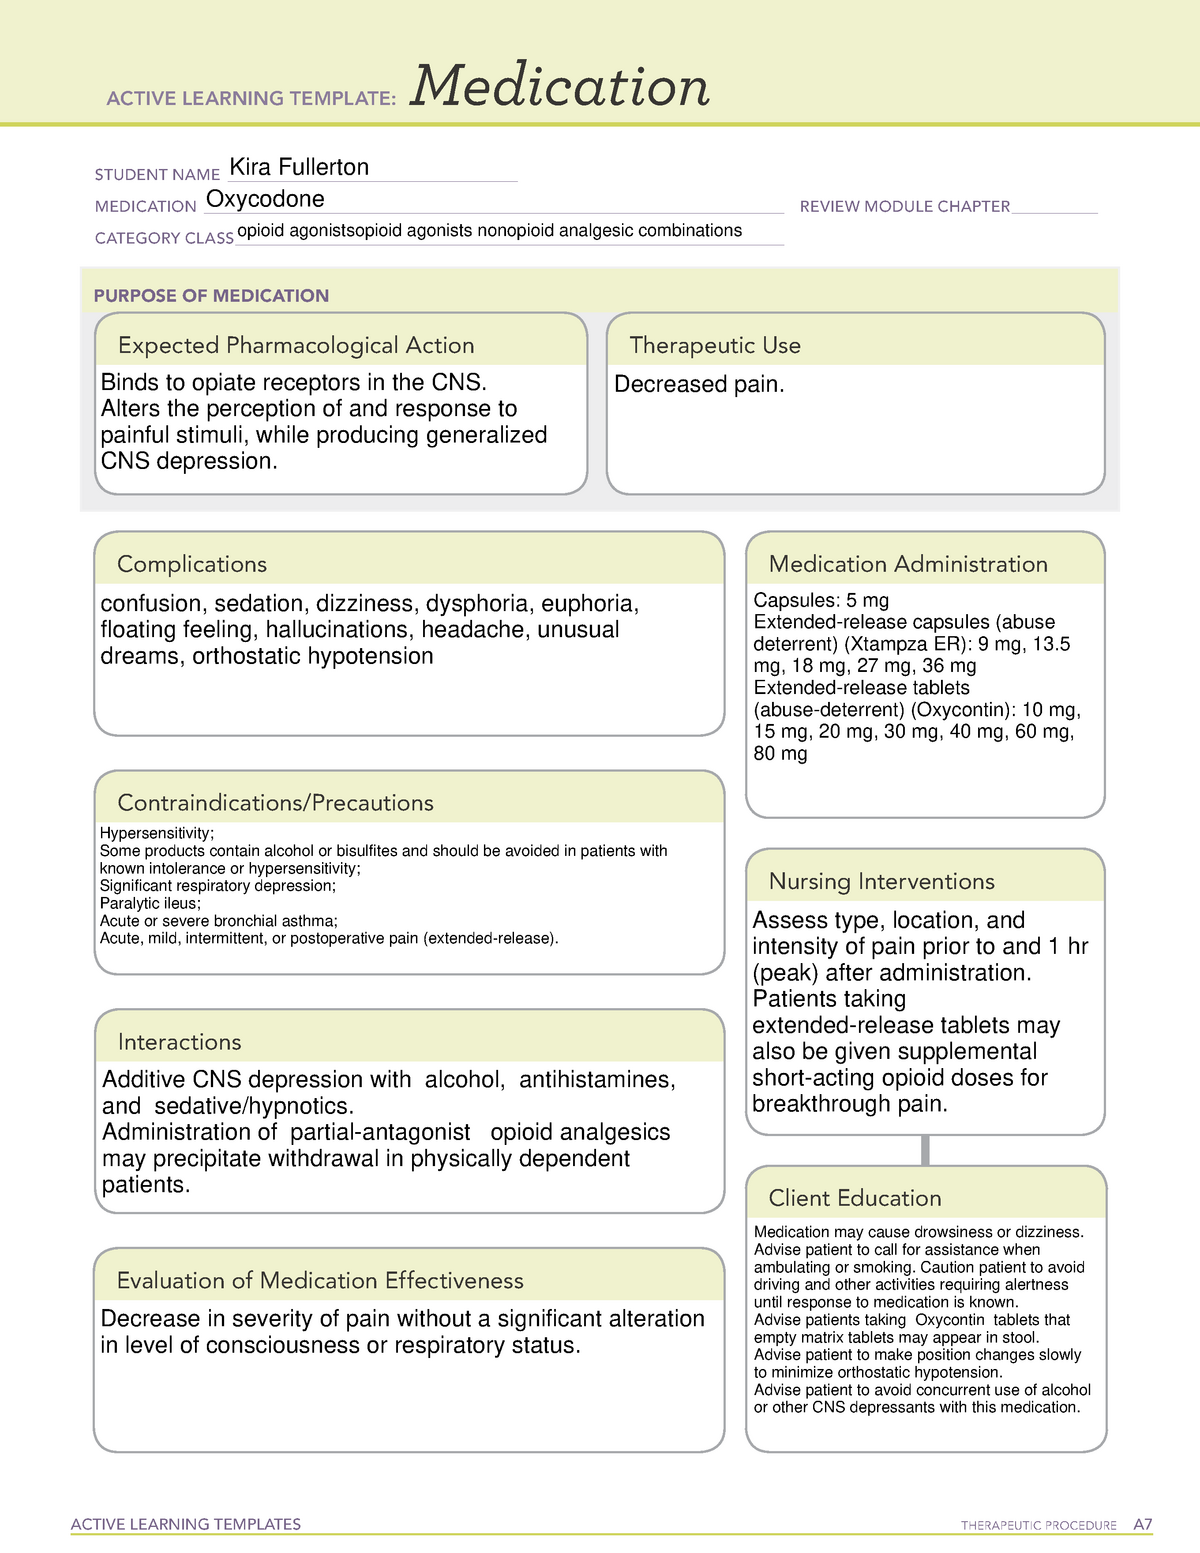 MED Oxycodone - ATI medications sheet - ACTIVE LEARNING TEMPLATES ...